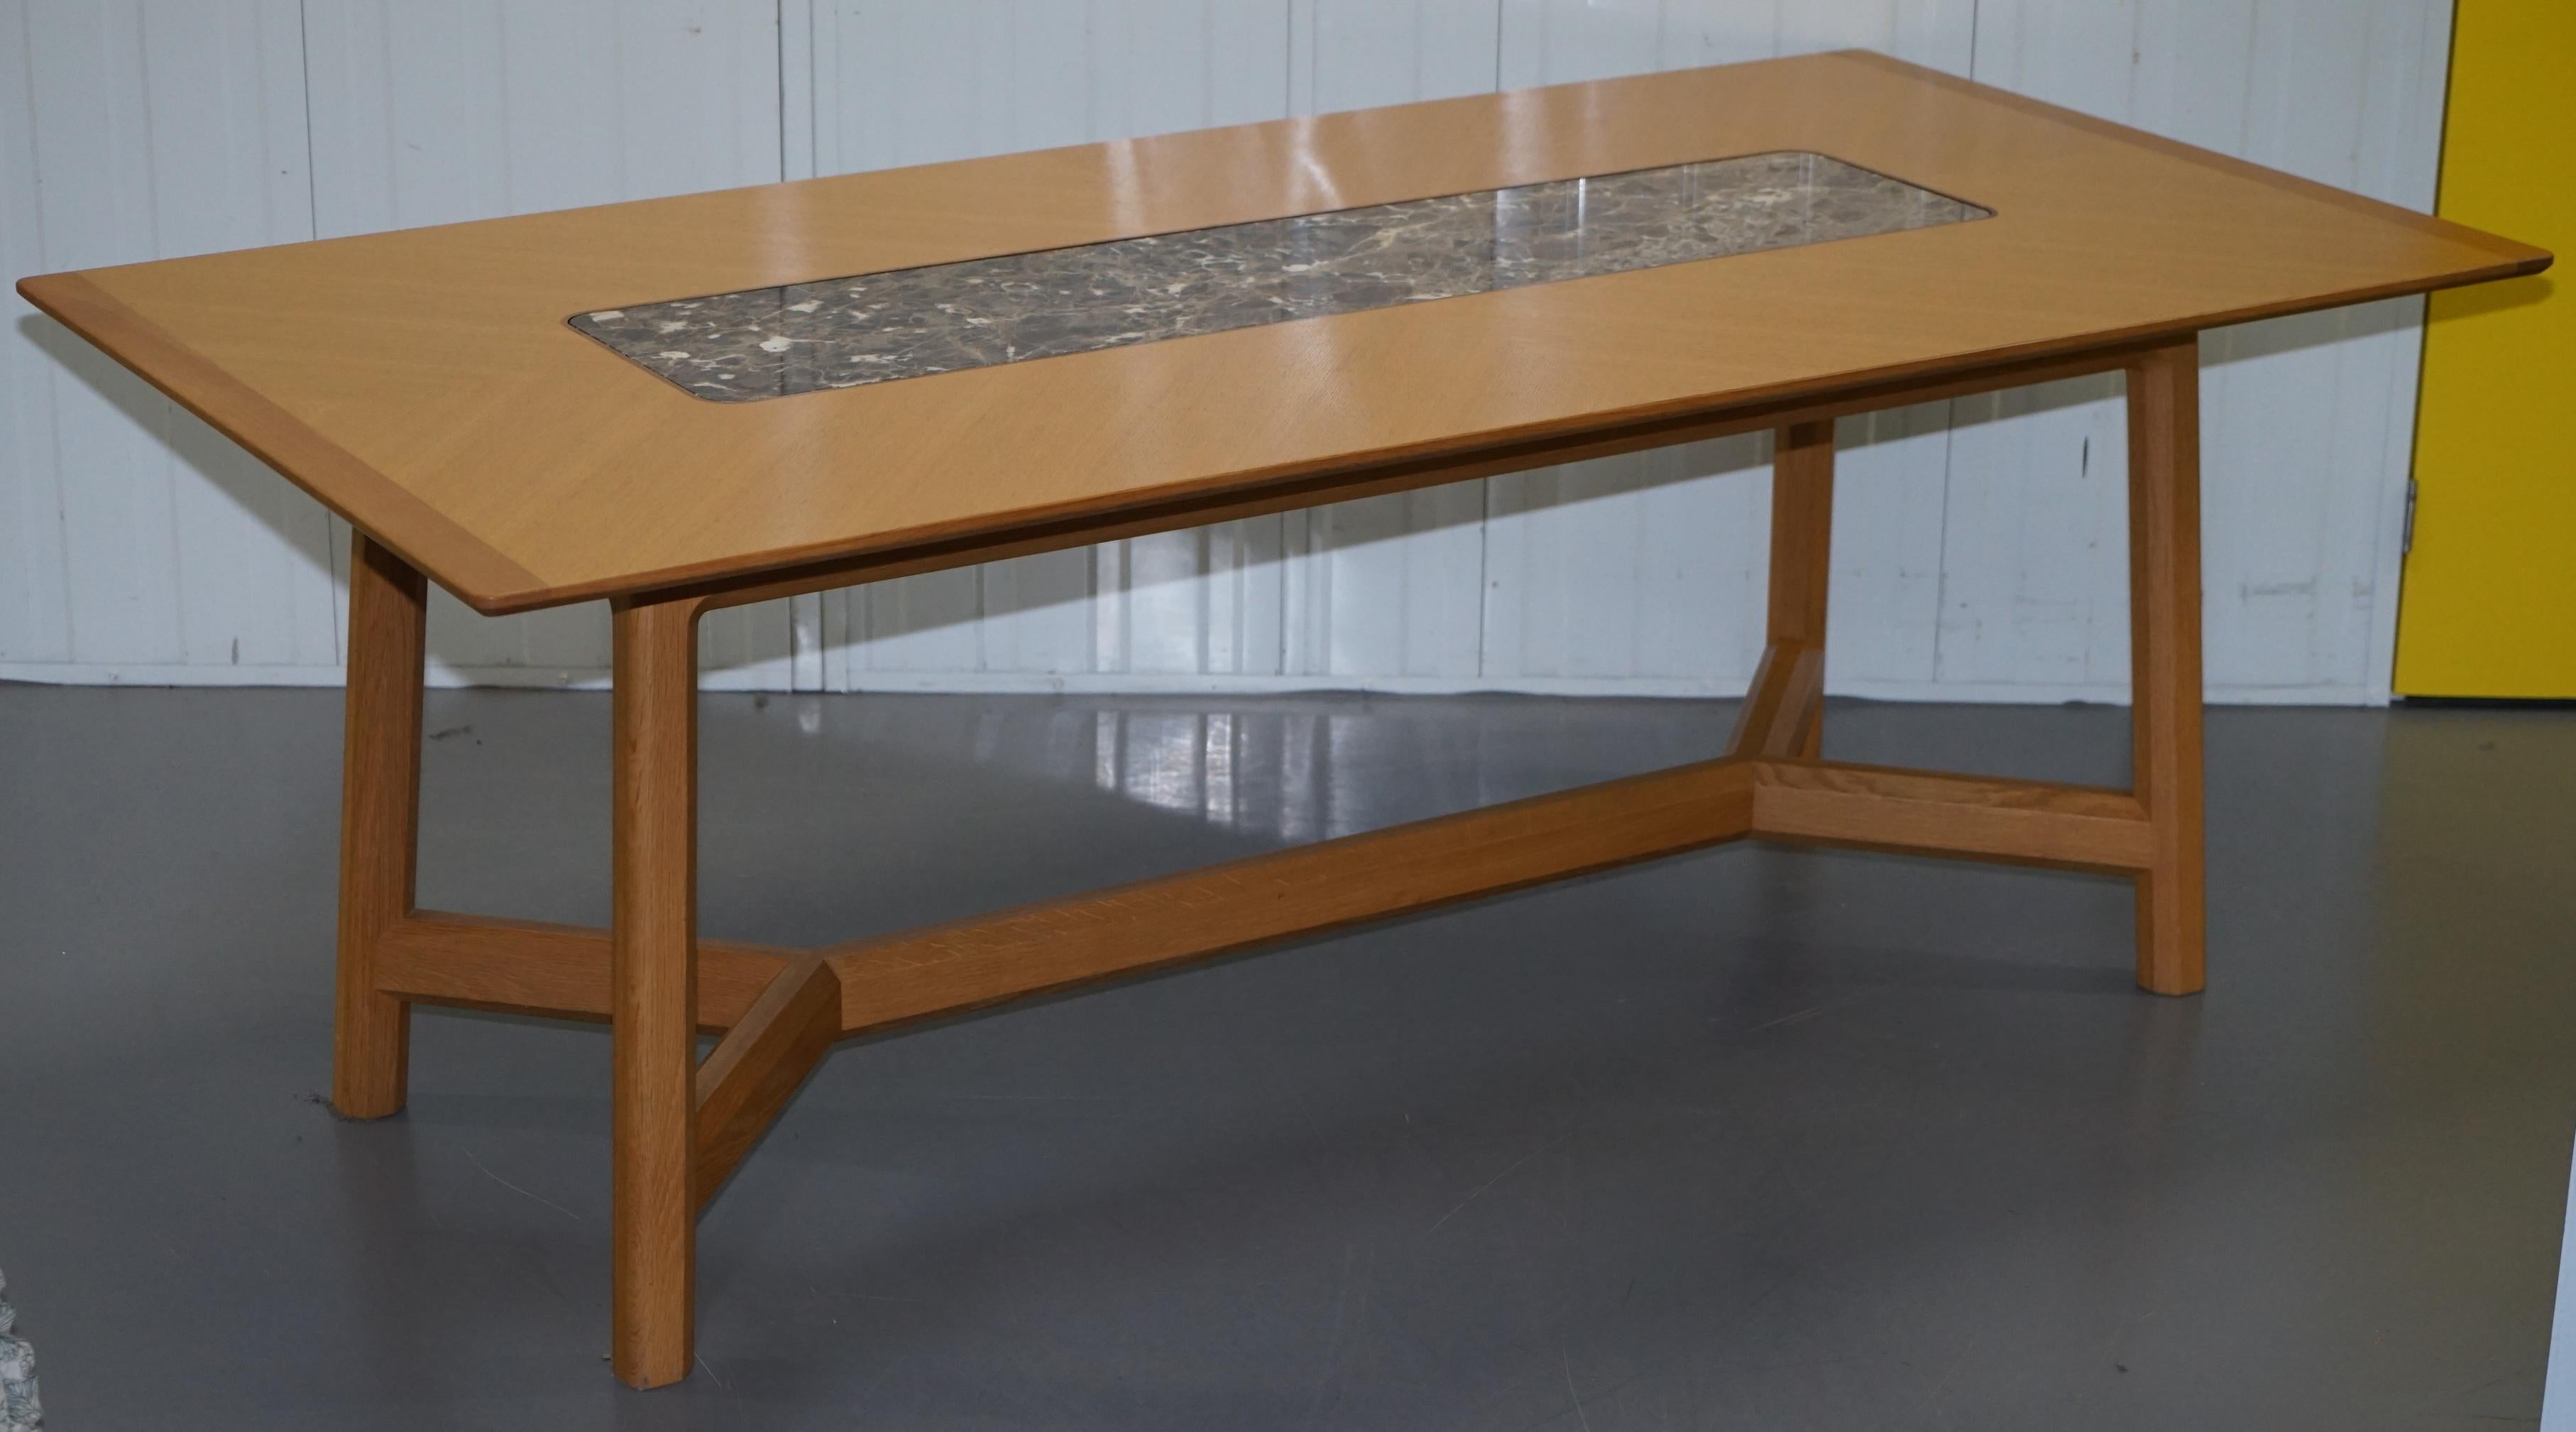 We are delighted to offer for sale this stunning perfect condition David Linley Newlyn collection solid sycamore wood with marble insert Hayrake Dining table RRP £14,500

A very good looking and well made table, the marble insert is great for